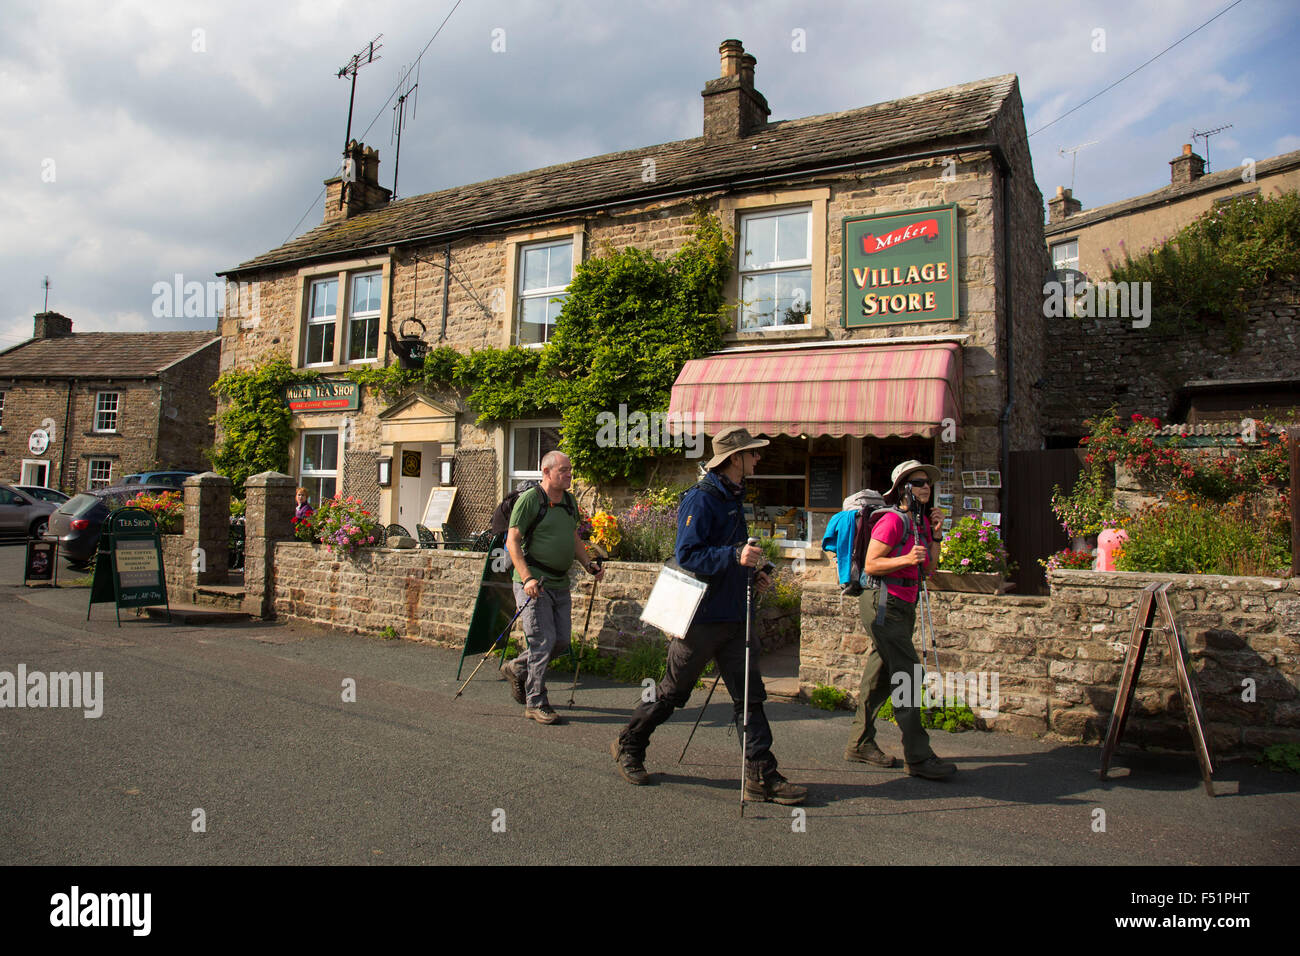 Hikers leave the village shop in Muker in Swaledale, which runs broadly from west to east. To the south and east of the ridge a number of smaller dales. Swaledale is a typical limestone Yorkshire dale, with its narrow valley-bottom road. Yorkshire, England, UK. Stock Photo